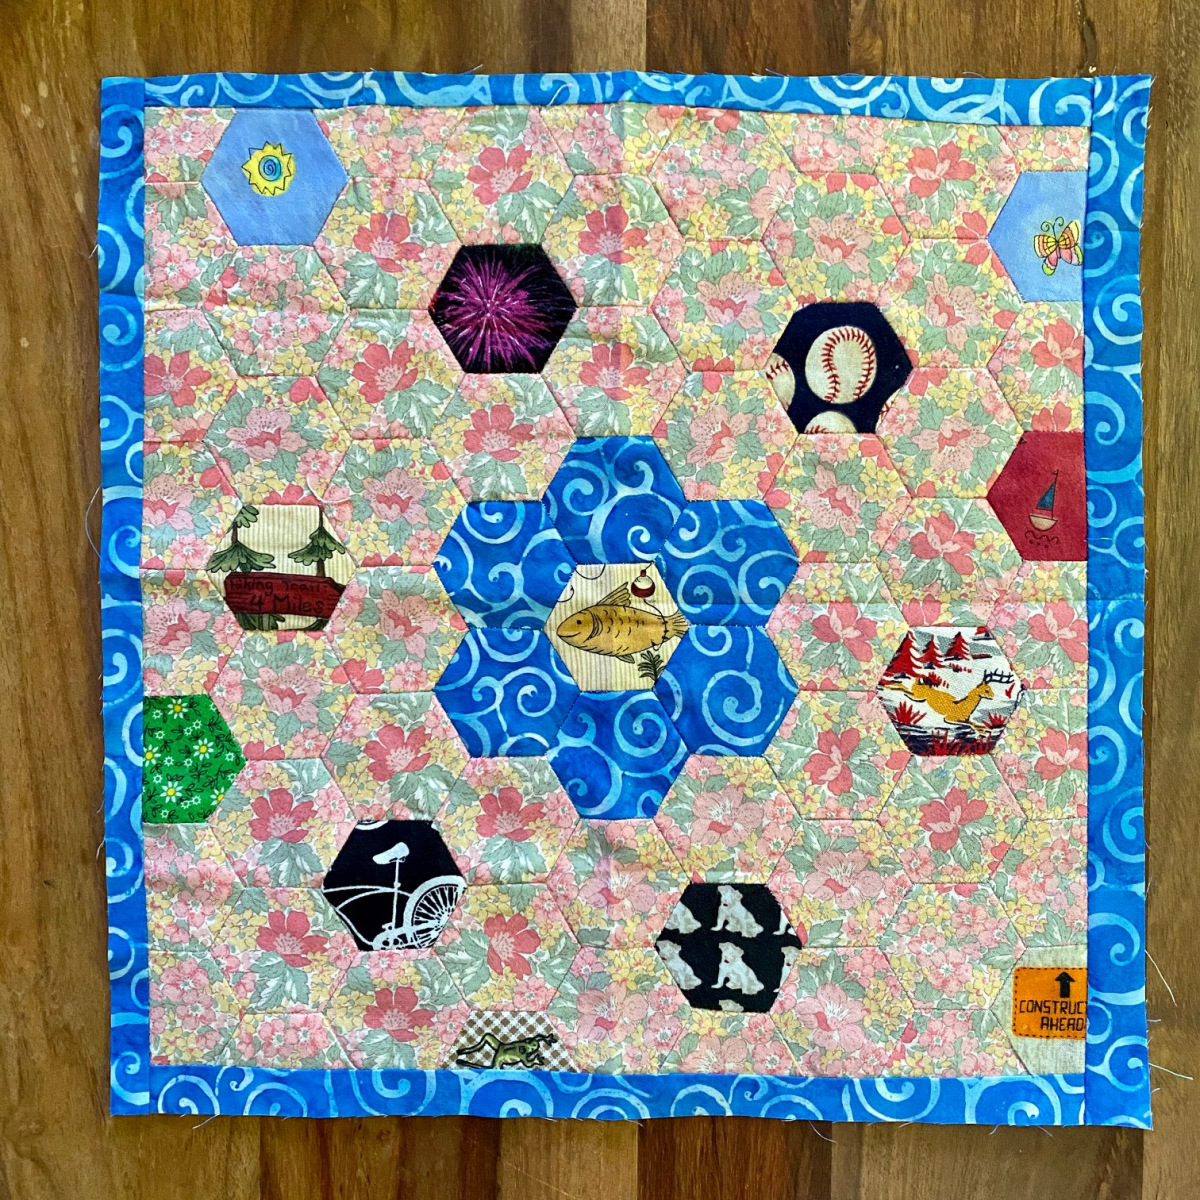 “Threads” Quilt Square Submissions